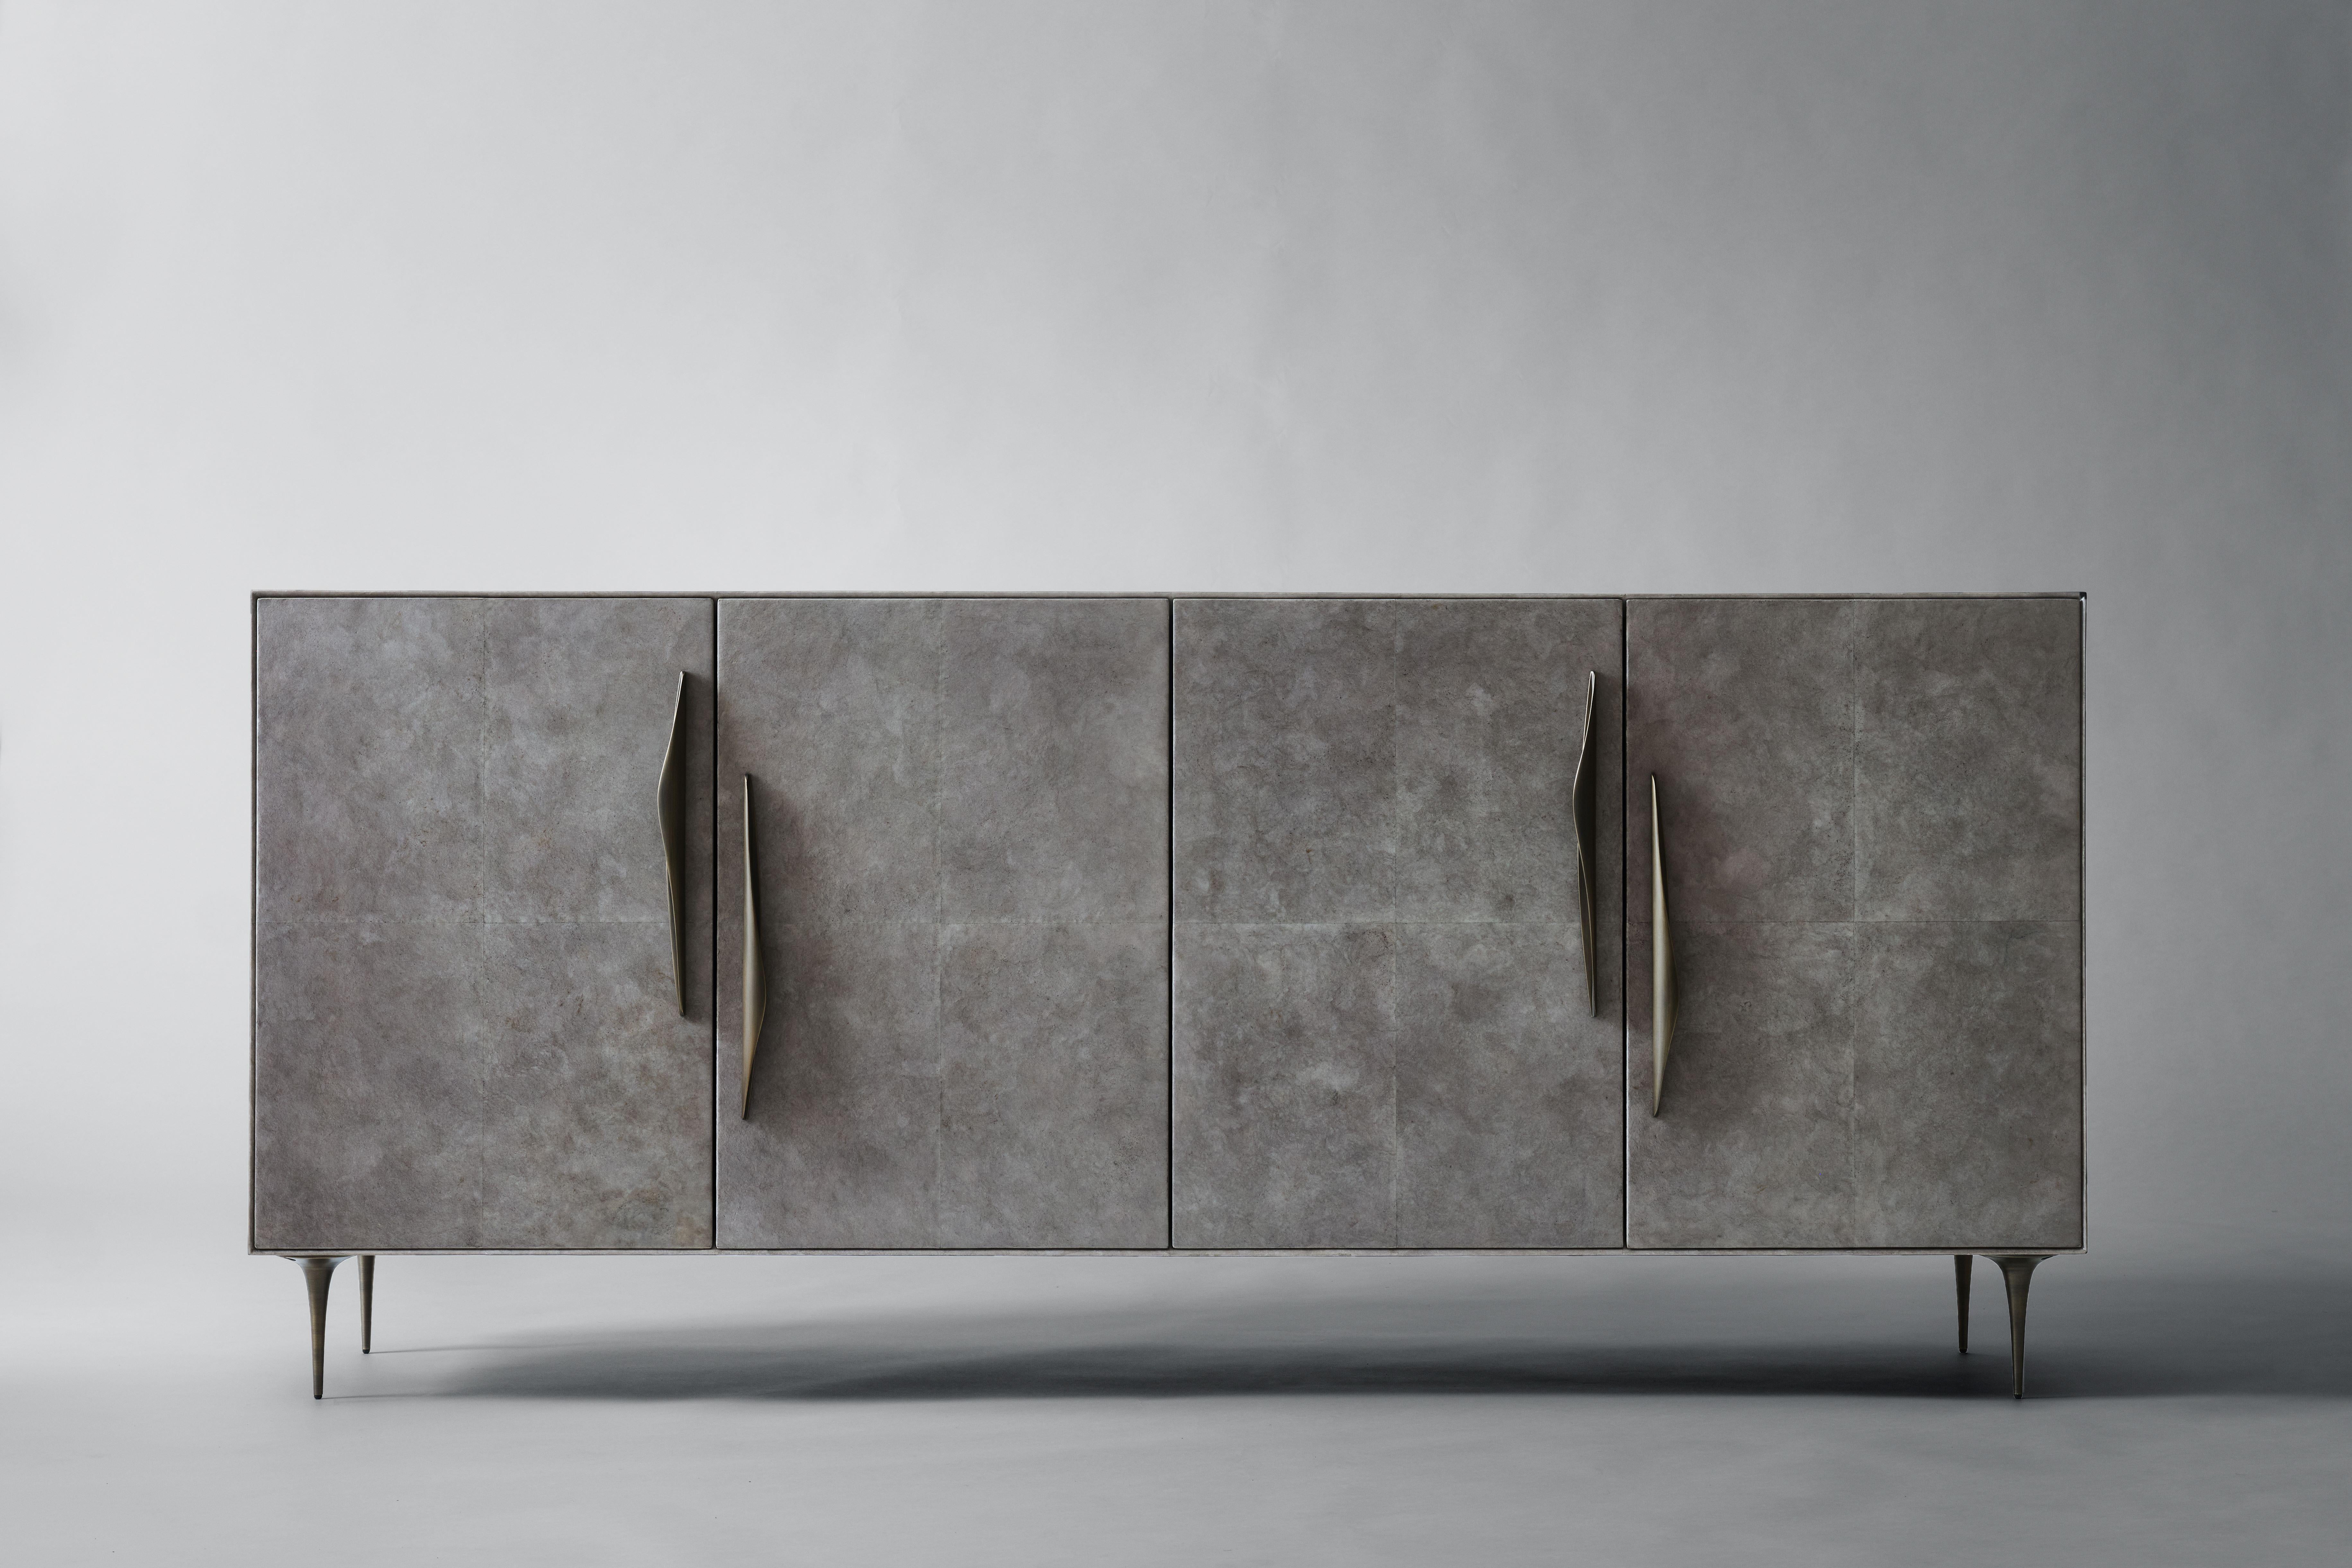 Inspired by vintage hardware found in Belgium, hand-cast bronze pulls in organic forms accent the Antwerp Cabinet. Clad in sheets of Carta, a characterful, plant-based alternative to parchment, the four-door piece stands on tapered bronze legs, with